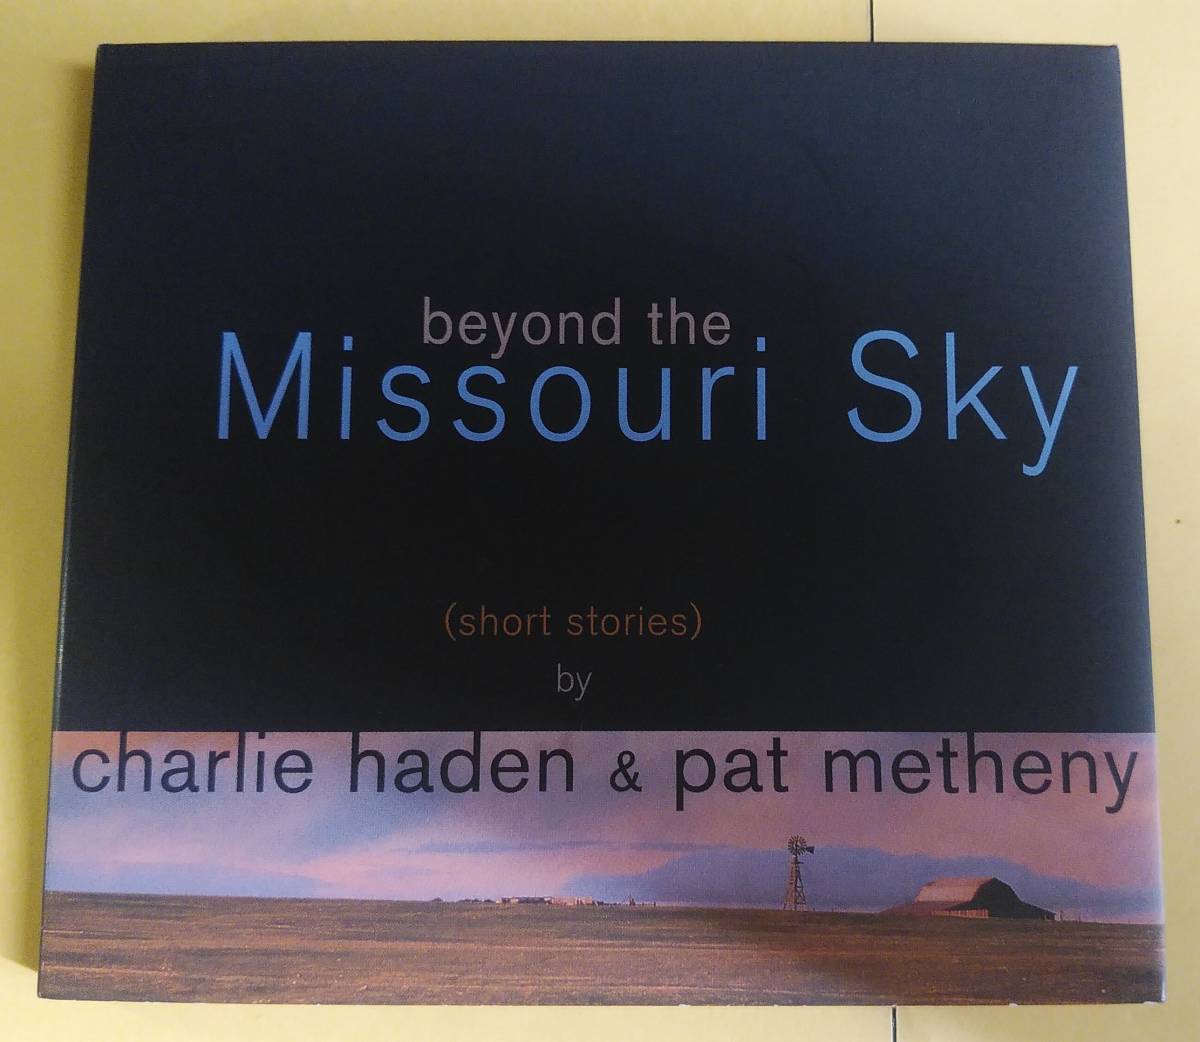 【Pat Metheny パット・メセニー】関連CD2枚 「beyond the Missouri Sky(CD+DVD/Verve 537 130-2)」 「Letter From Home(リマスター)」_1.